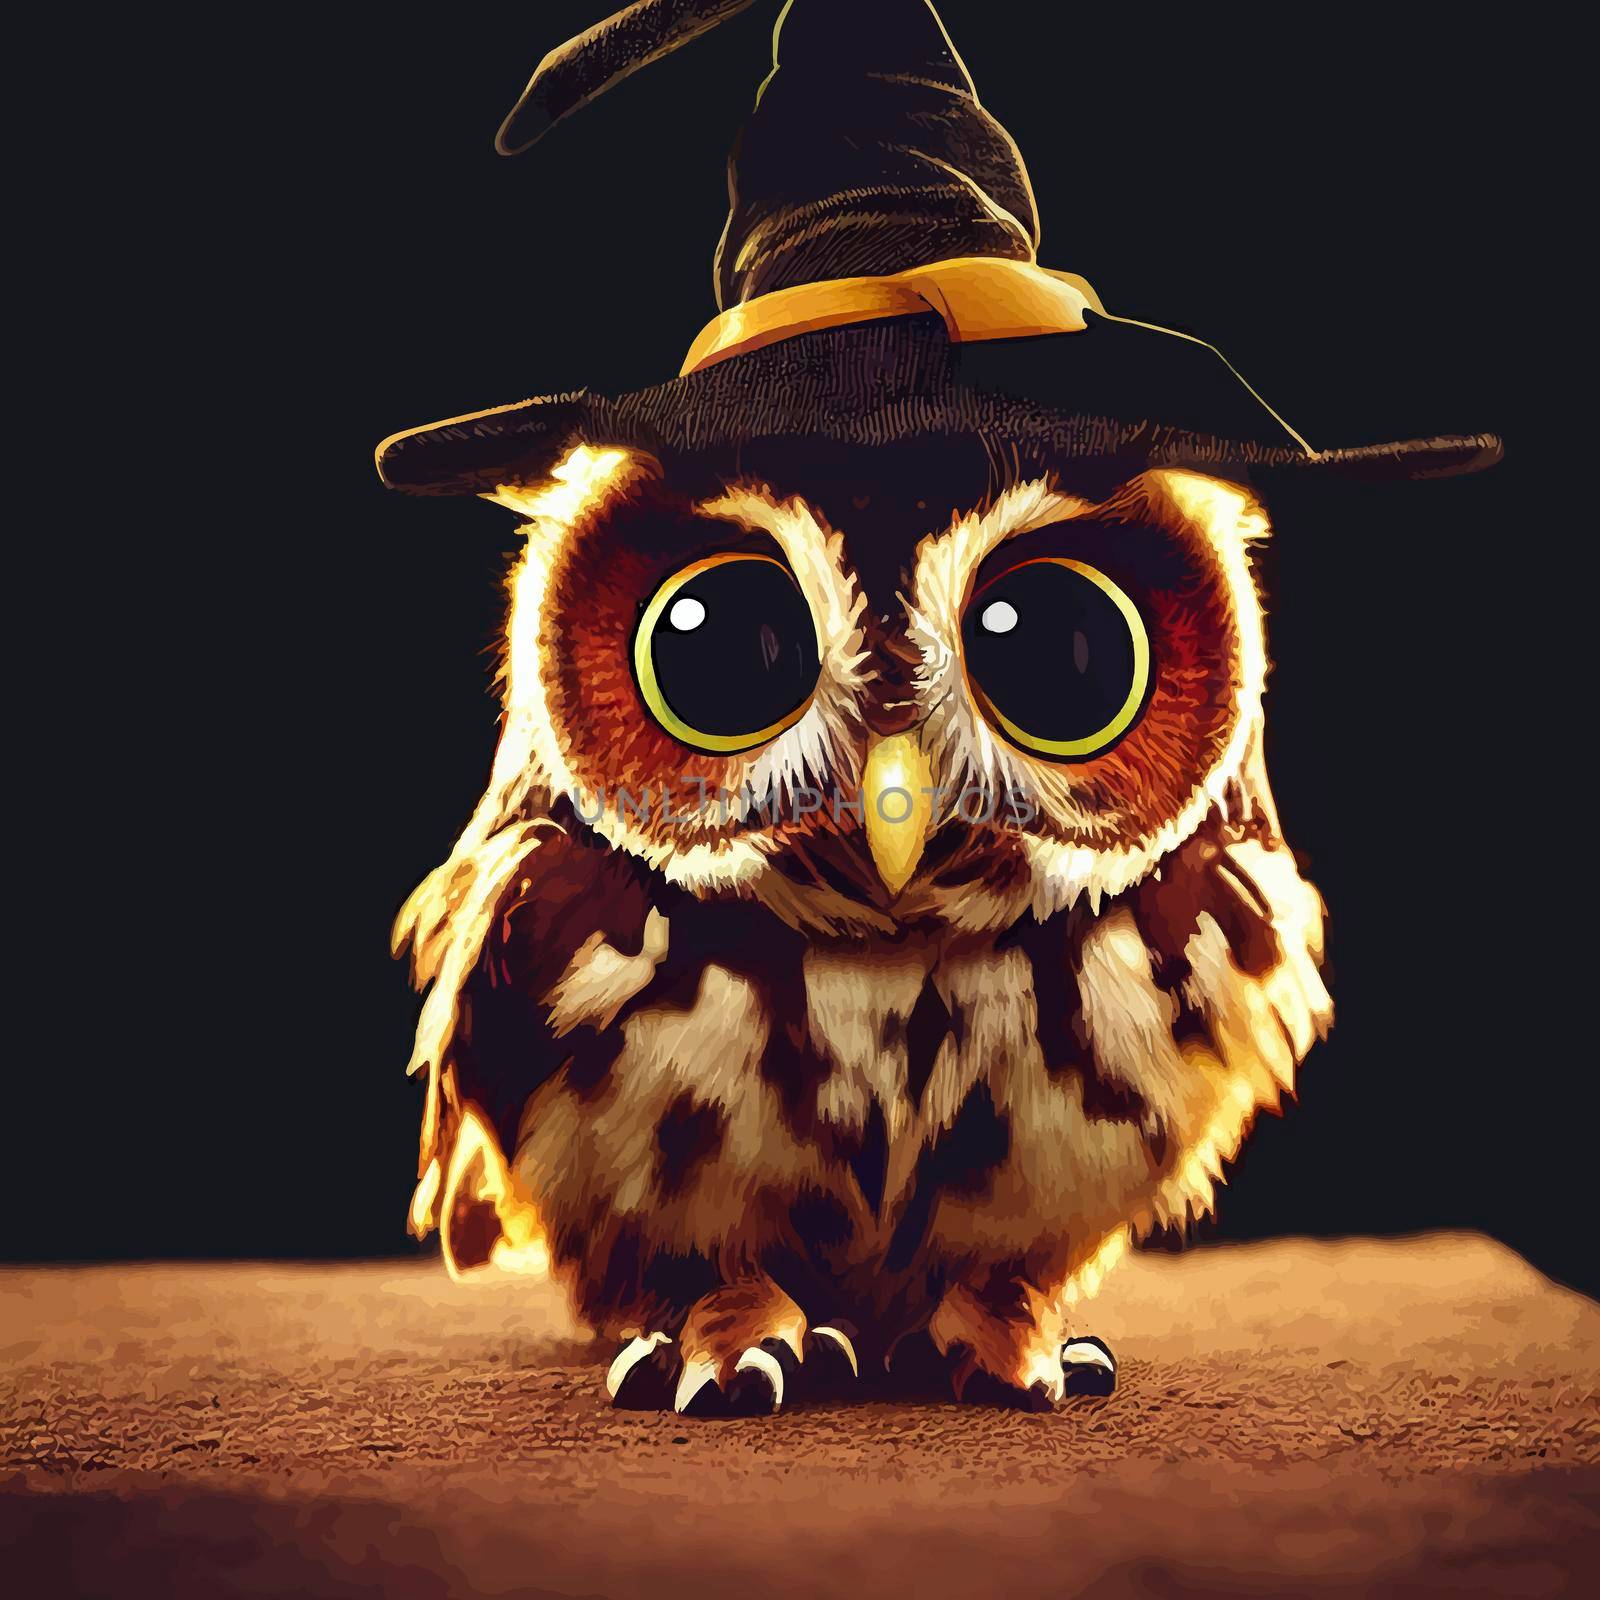 animated illustration of a cute owl with hat, animated owl portrait by JpRamos